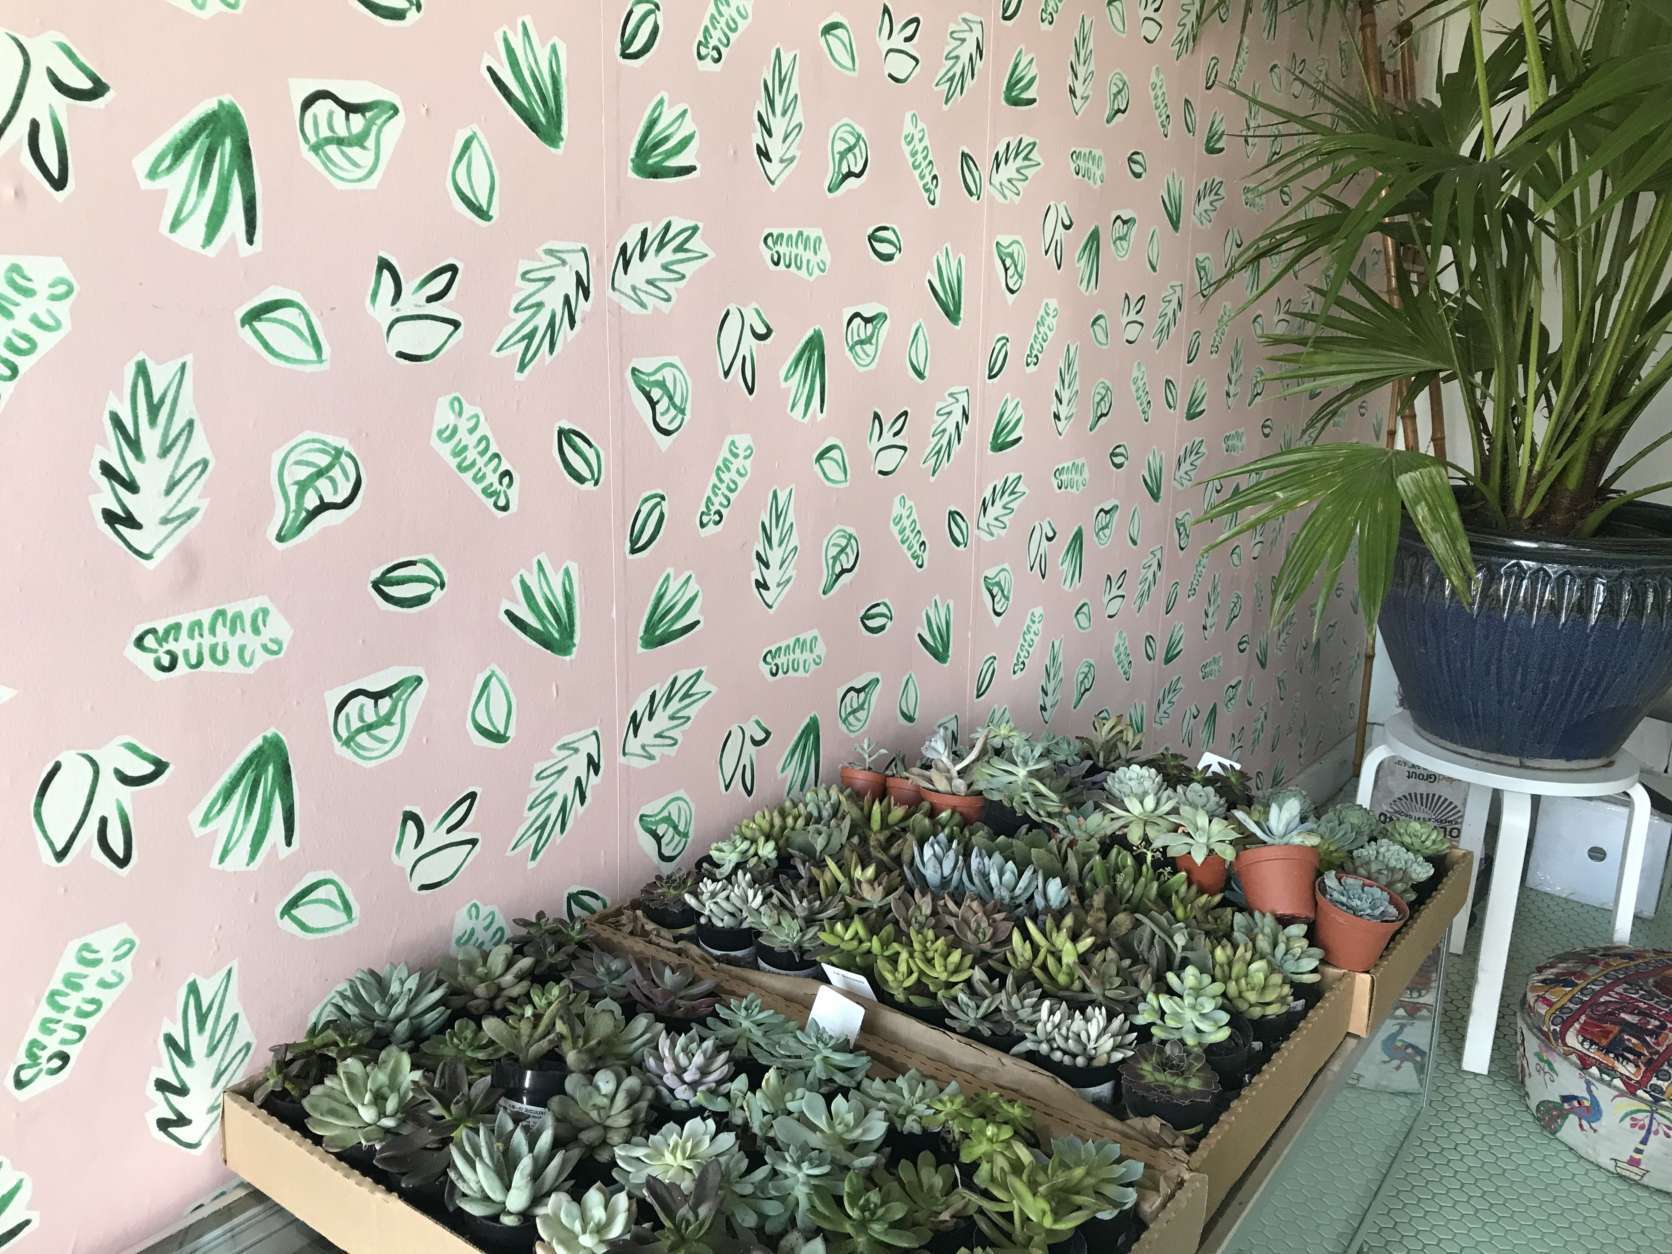 Inside The Lemon Collective's studio, succulents are ready to be used in an array of projects. (WTOP/Ginger Whitaker)